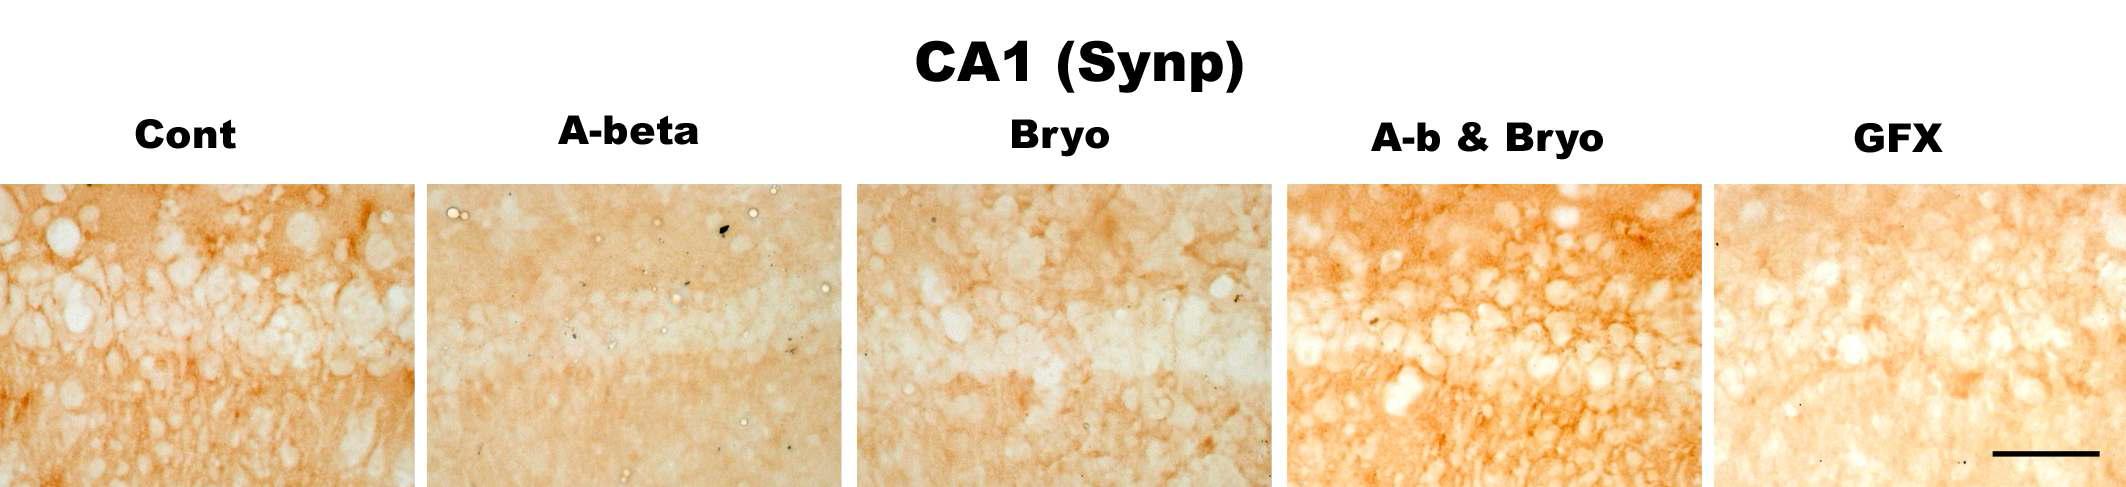 Effects of Bryostatin-1 on synapses in CA1 pyramidal neurons of hippocampus in rat. Bryostatin-1 significantly prevented reduction of synaptophysin (presynaptic protein) in CA1 of rat infused with amyloid beta. PKC inhibitor GFX 109203 reduces synaptophysin in CA1. Intracerebro-ventricular infusion of Aβ and Bryostatin-1 was for four weeks using a micro-osmotic pump. PKC inhibitor GFX 109203 was administrated with I.c.v. injection. Immuno- histochemistry (anti-CD11b) (scale bar, 50μm)(40Χ magnification)